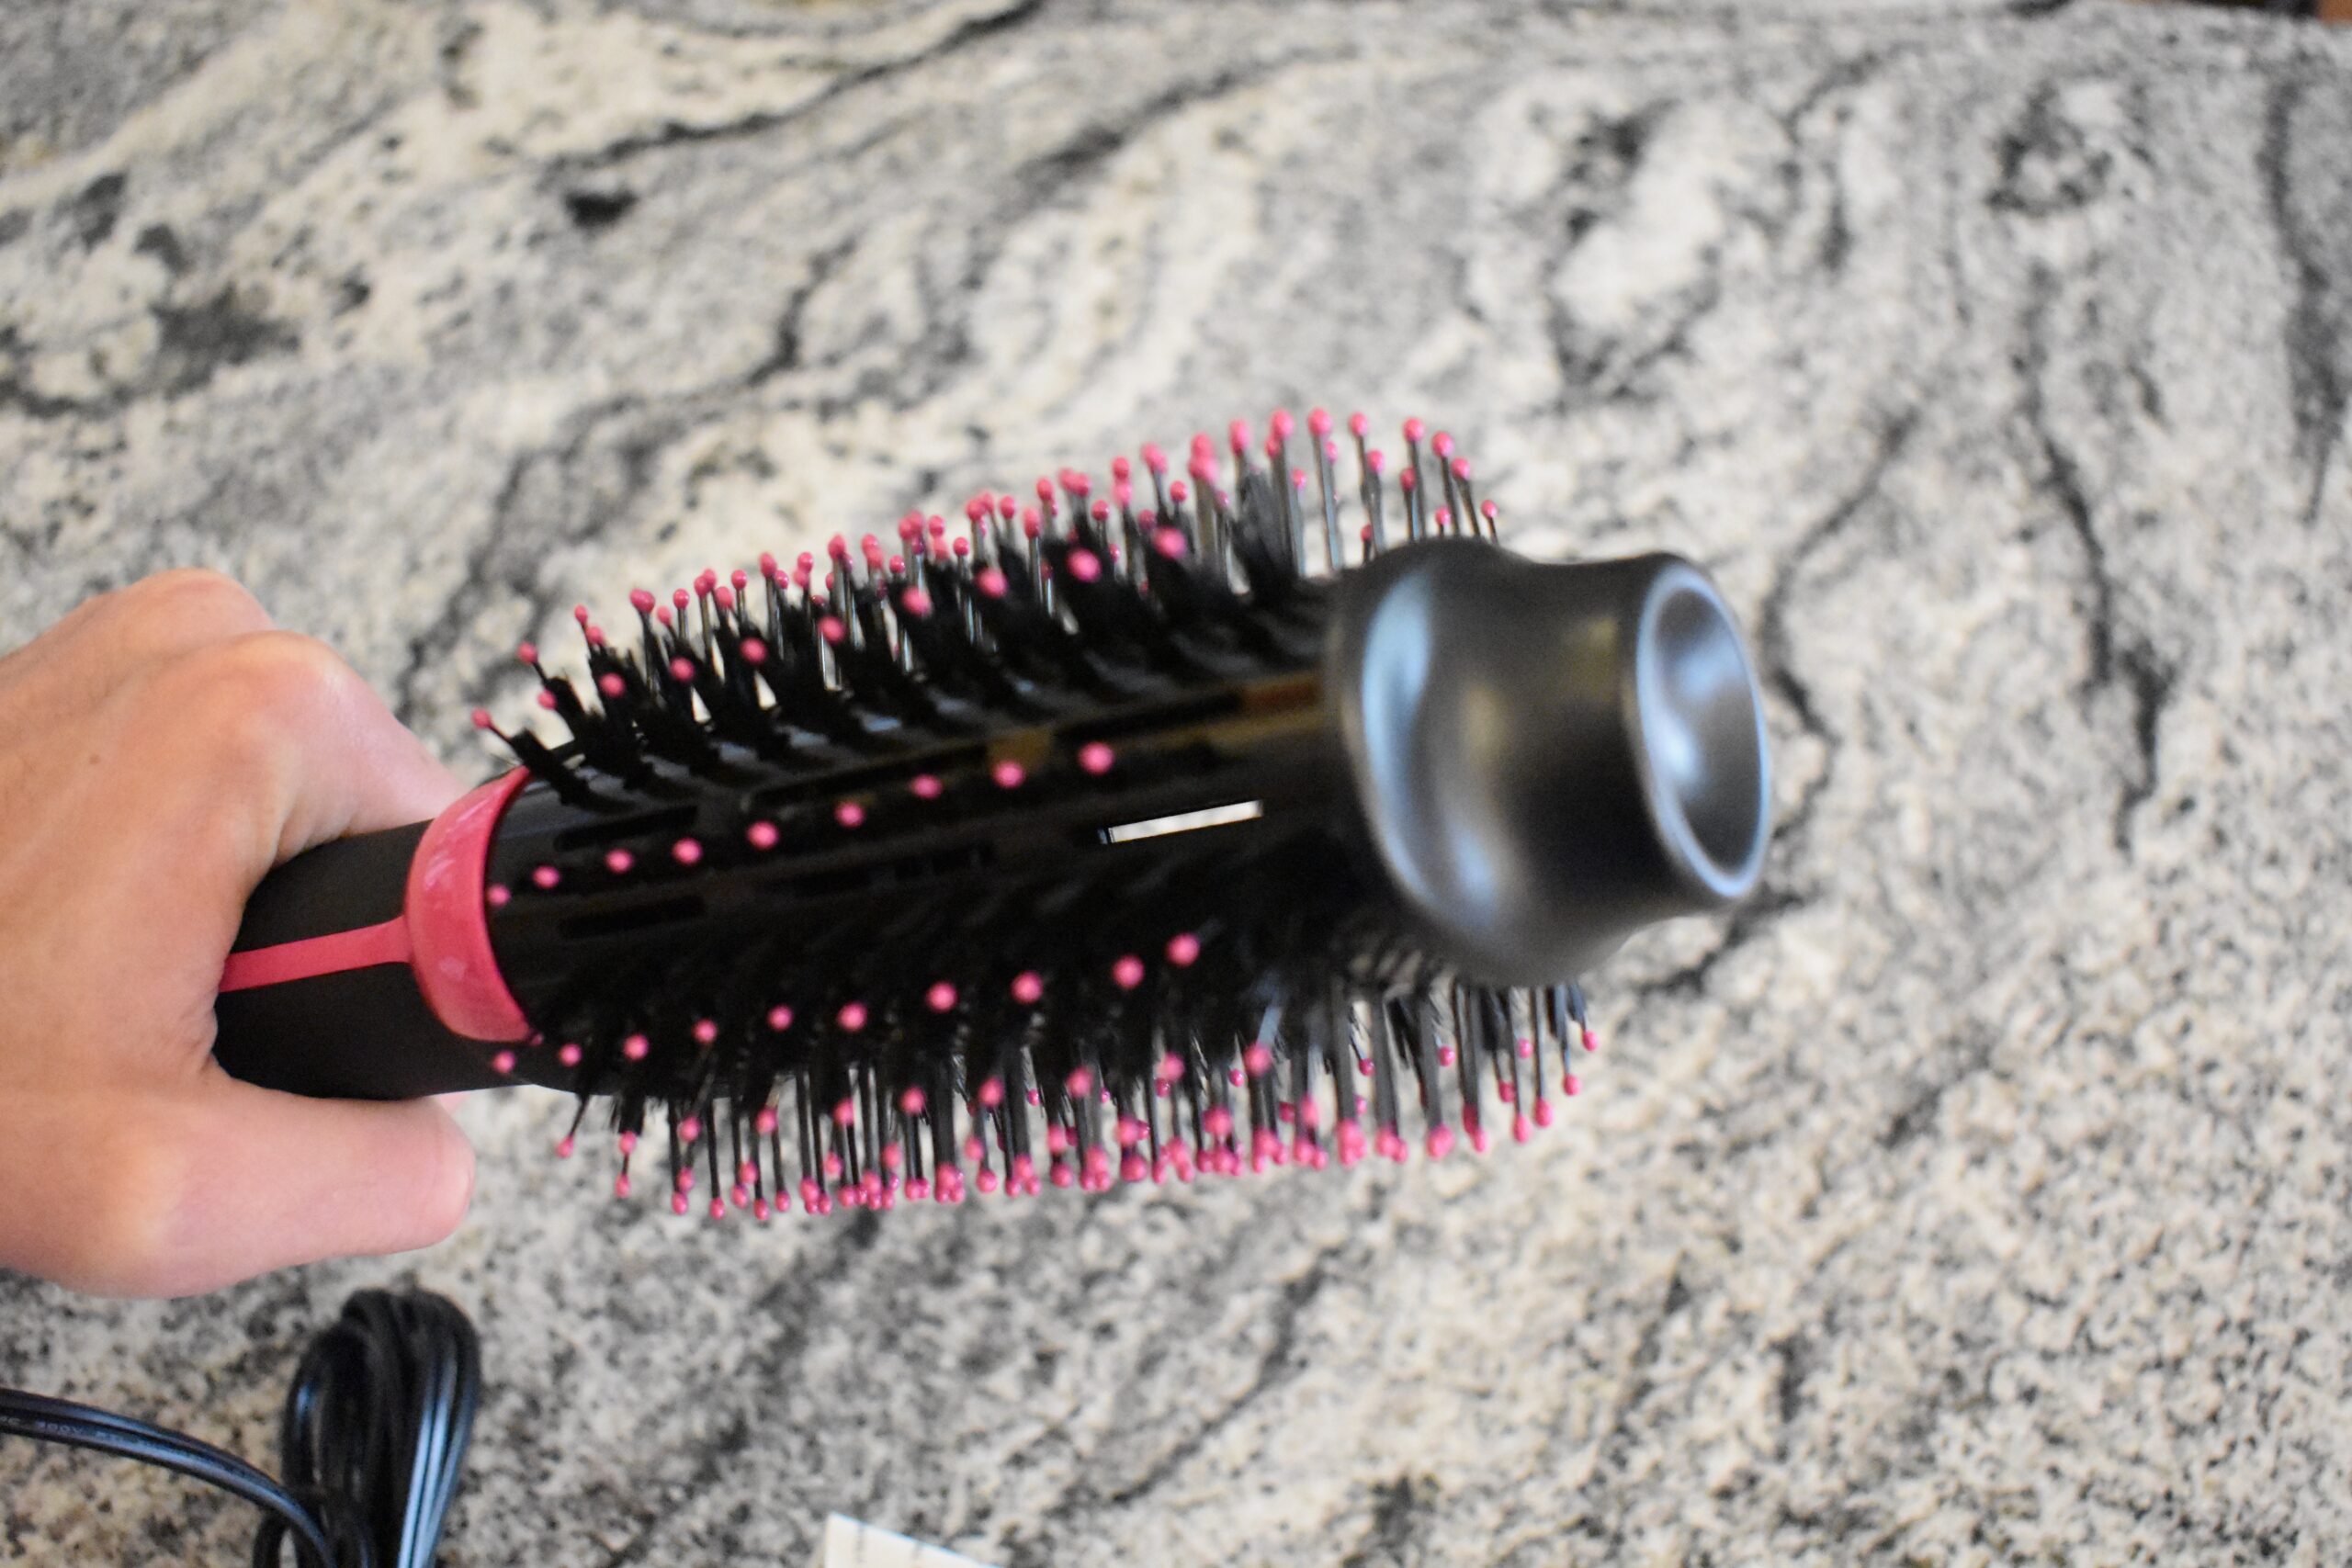 Close-up of the bristles on the Revlon Power styler